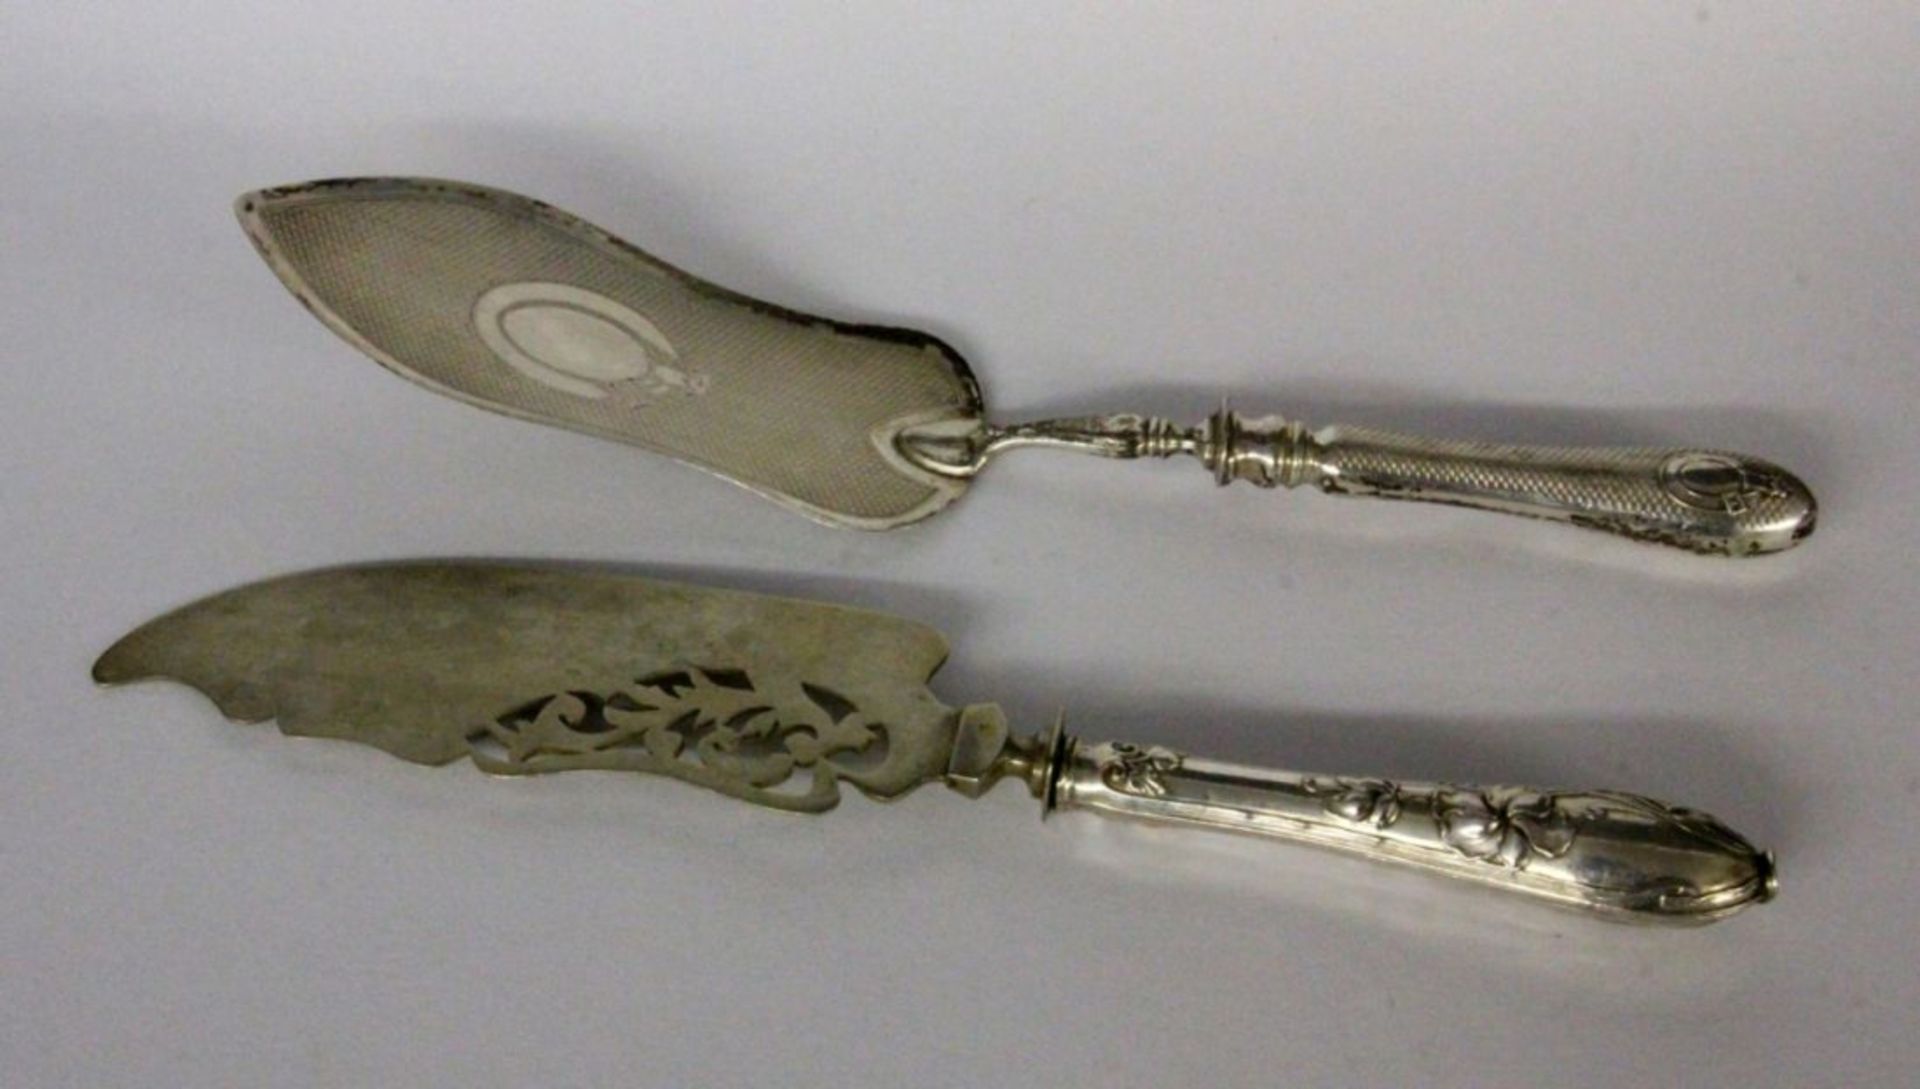 TWO CAKE SLICES with silver handles. 29 cm long. Keywords: miscellaneous pieces,